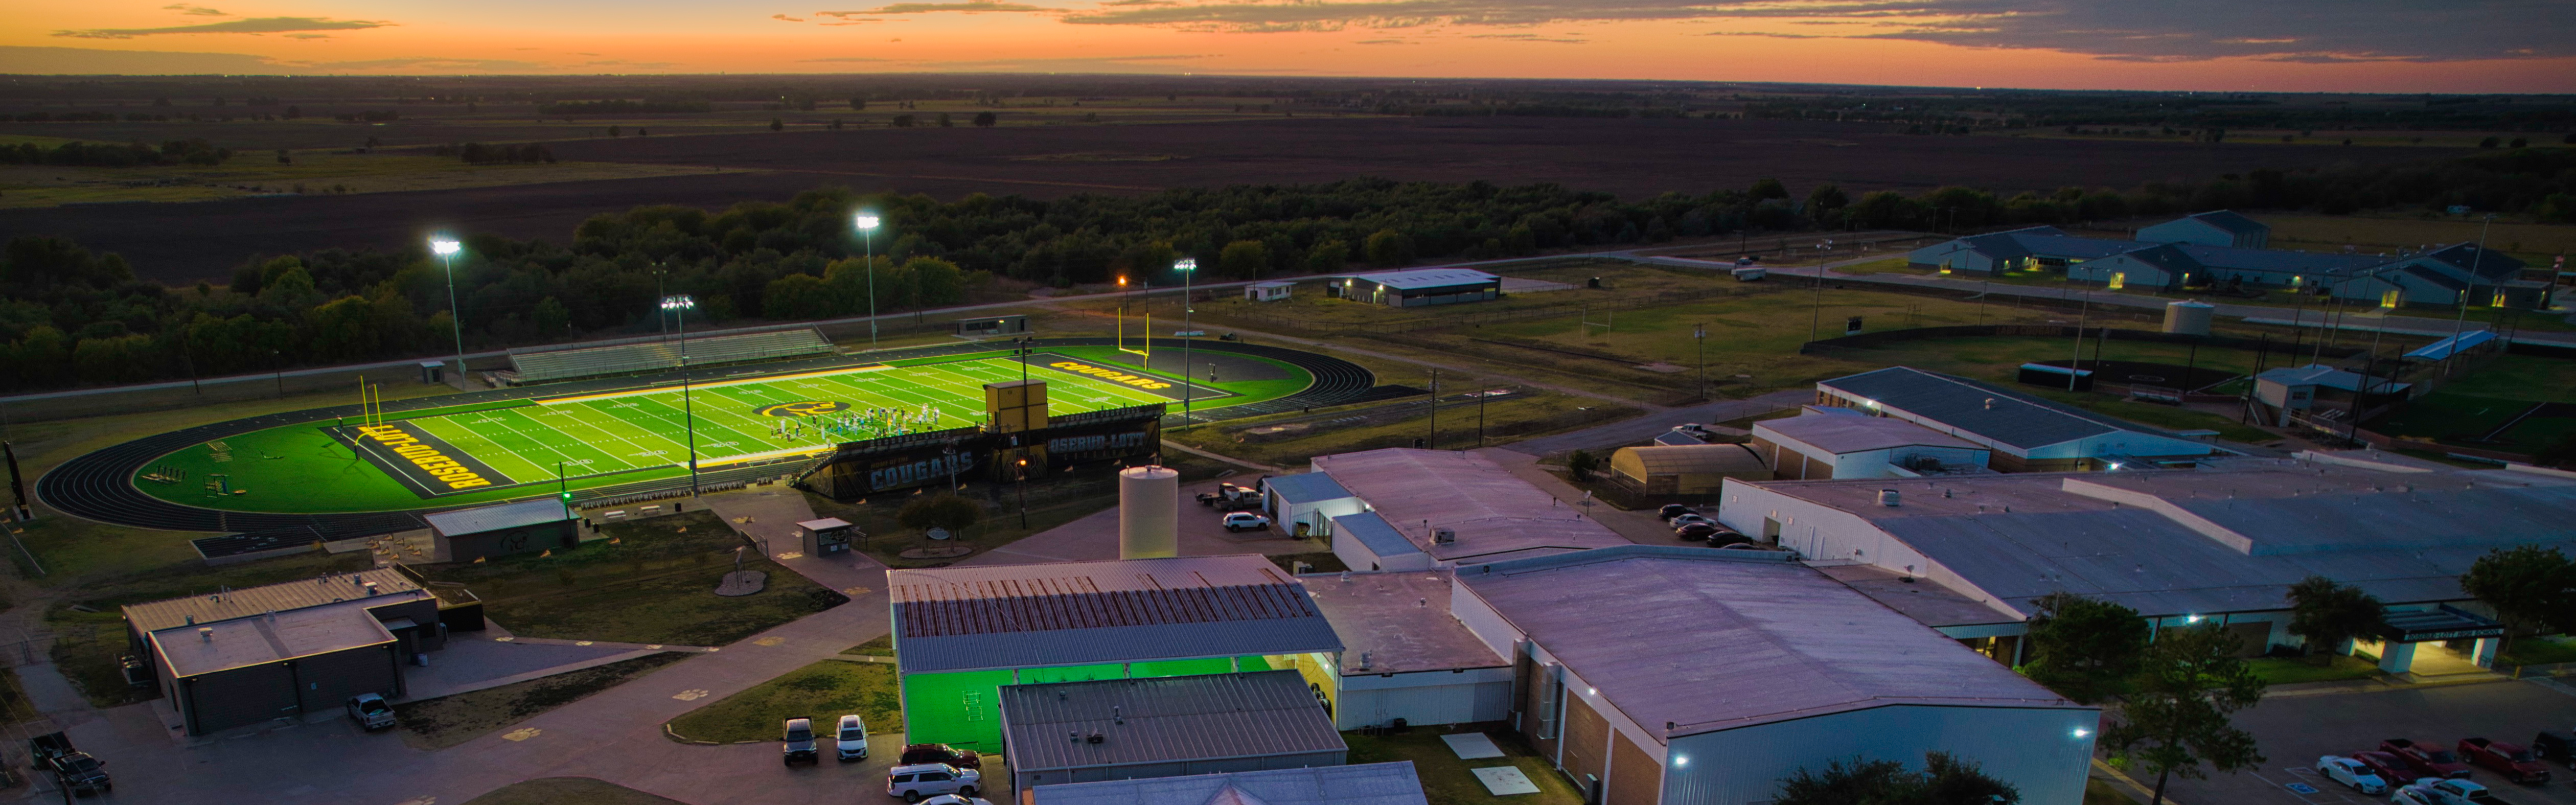 Aerial photo of campus buildings and football field in the evening